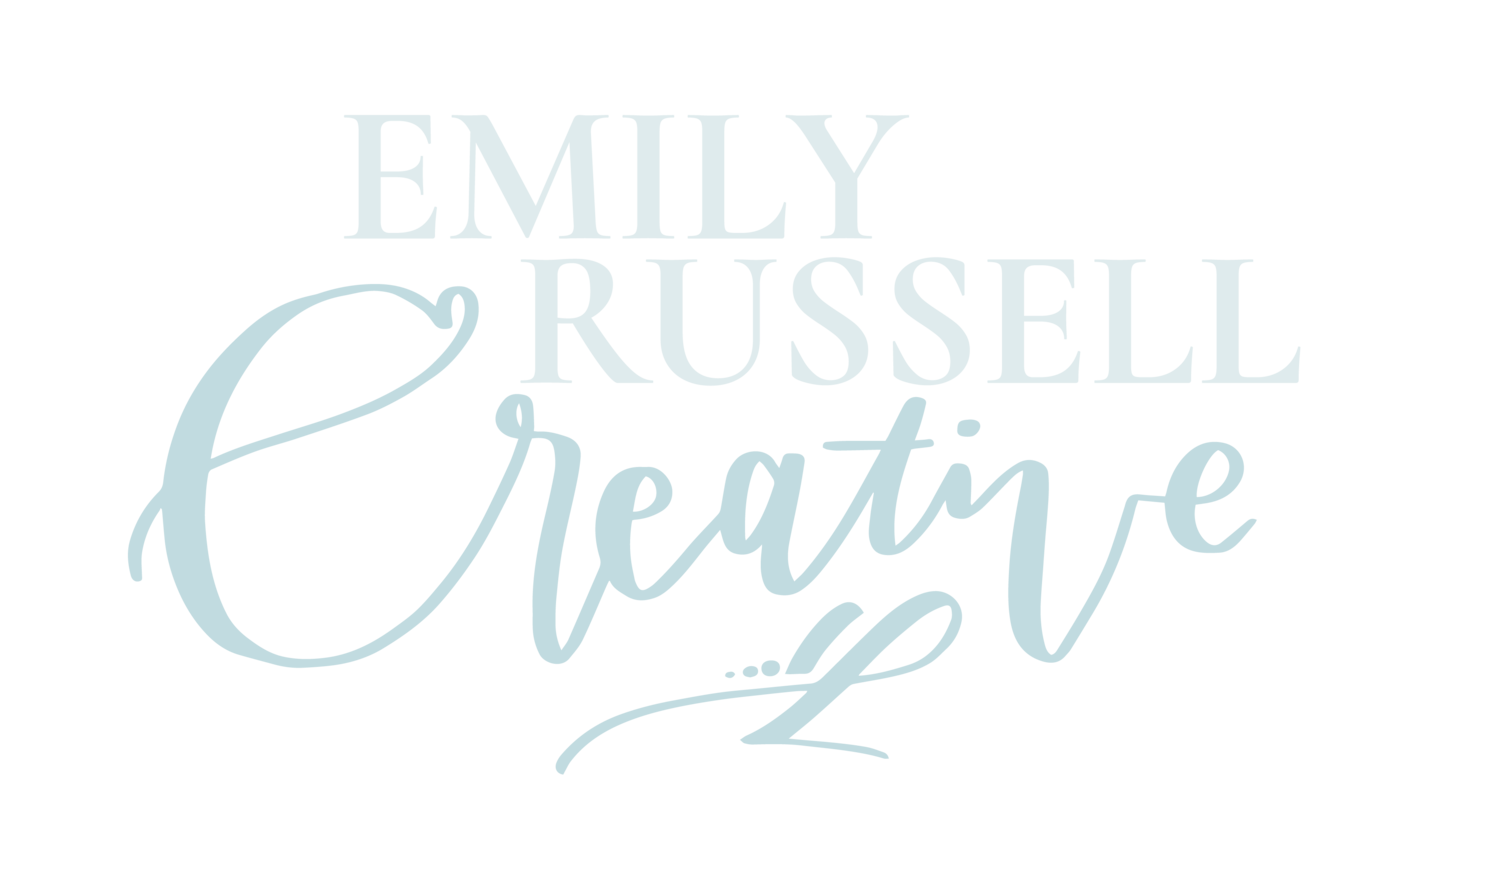 Emily Russell Creative